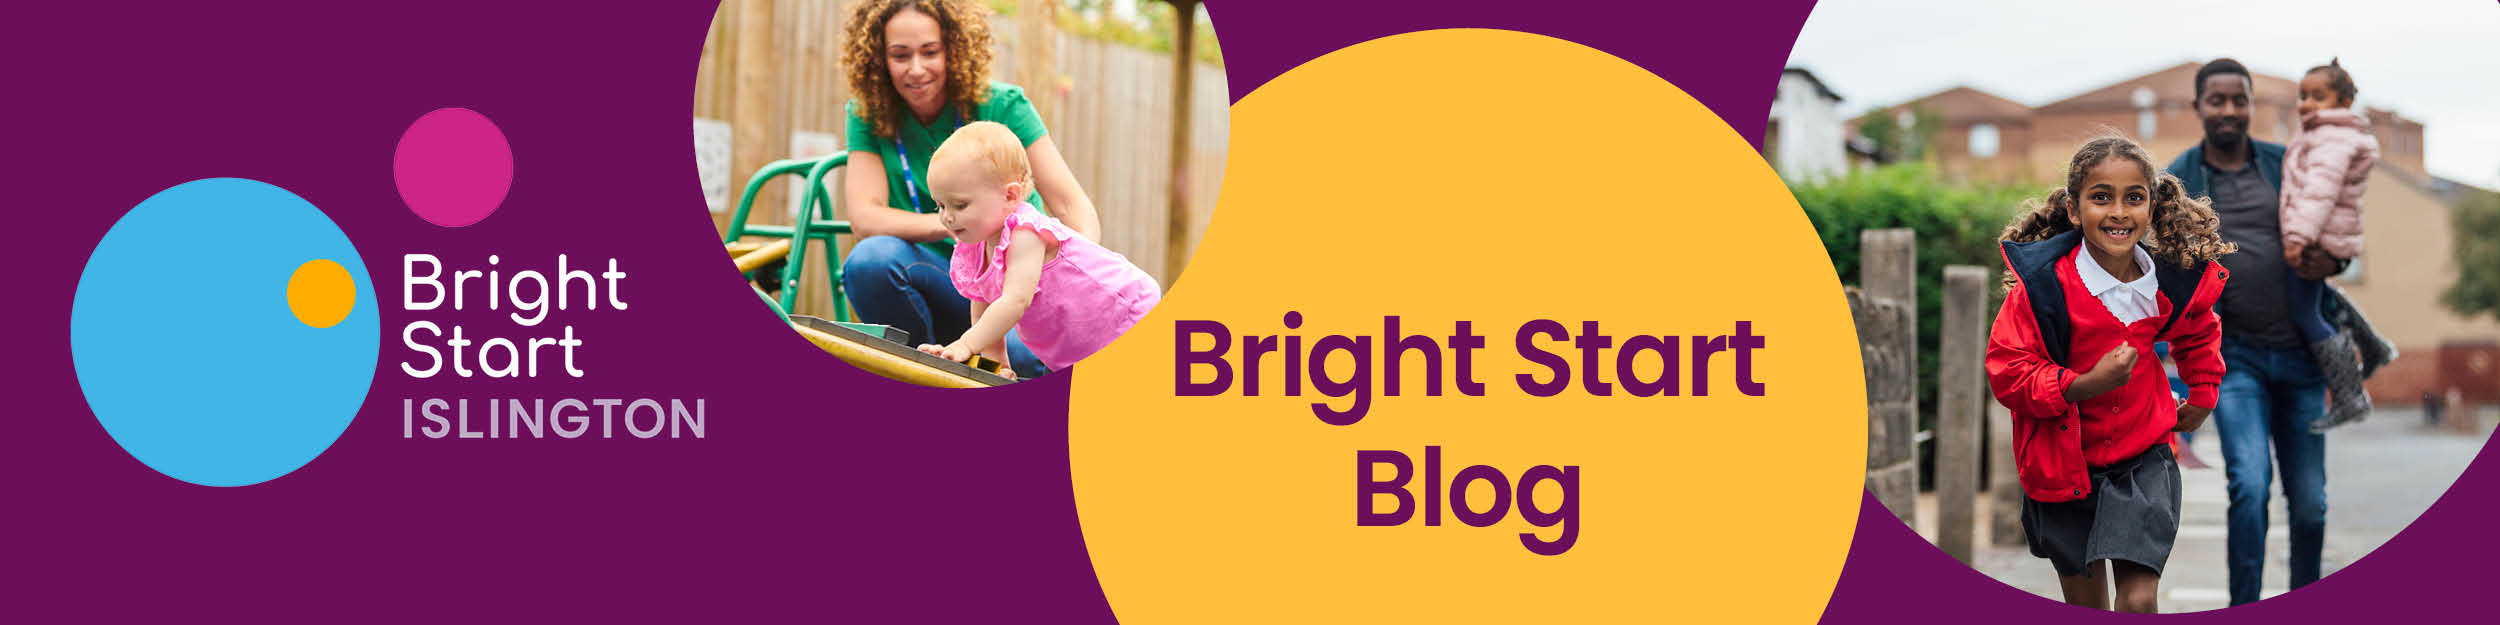 Bright Start blog banner with images of young people and the words 'Bright Start Islington'